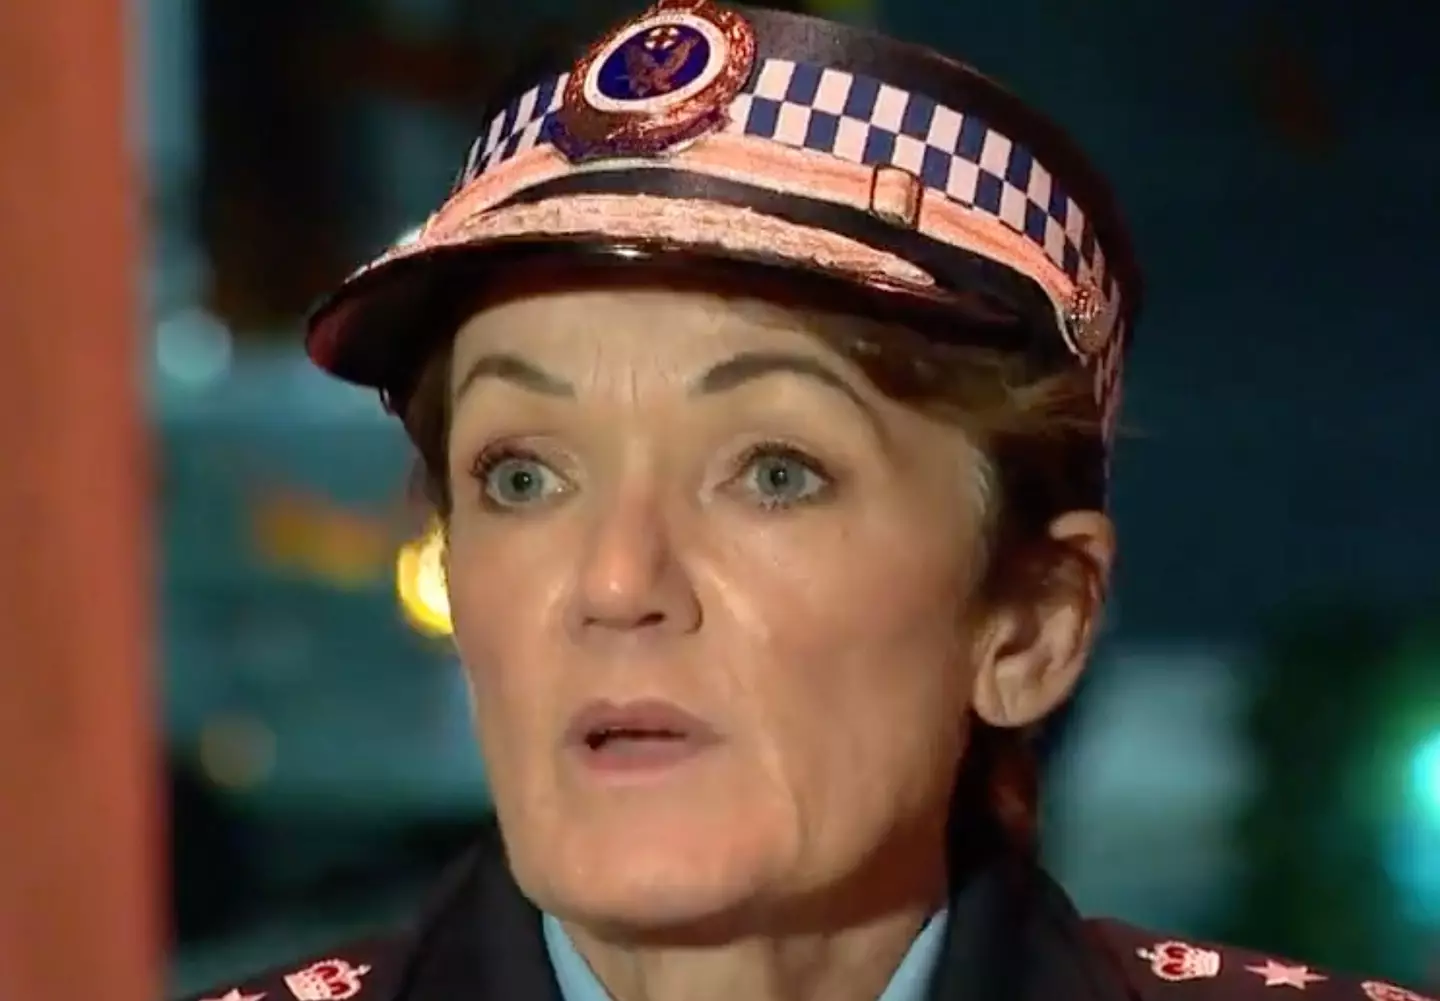 NSW Police Commissioner Karen Webb confirmed a police officer has been charged with GBH.